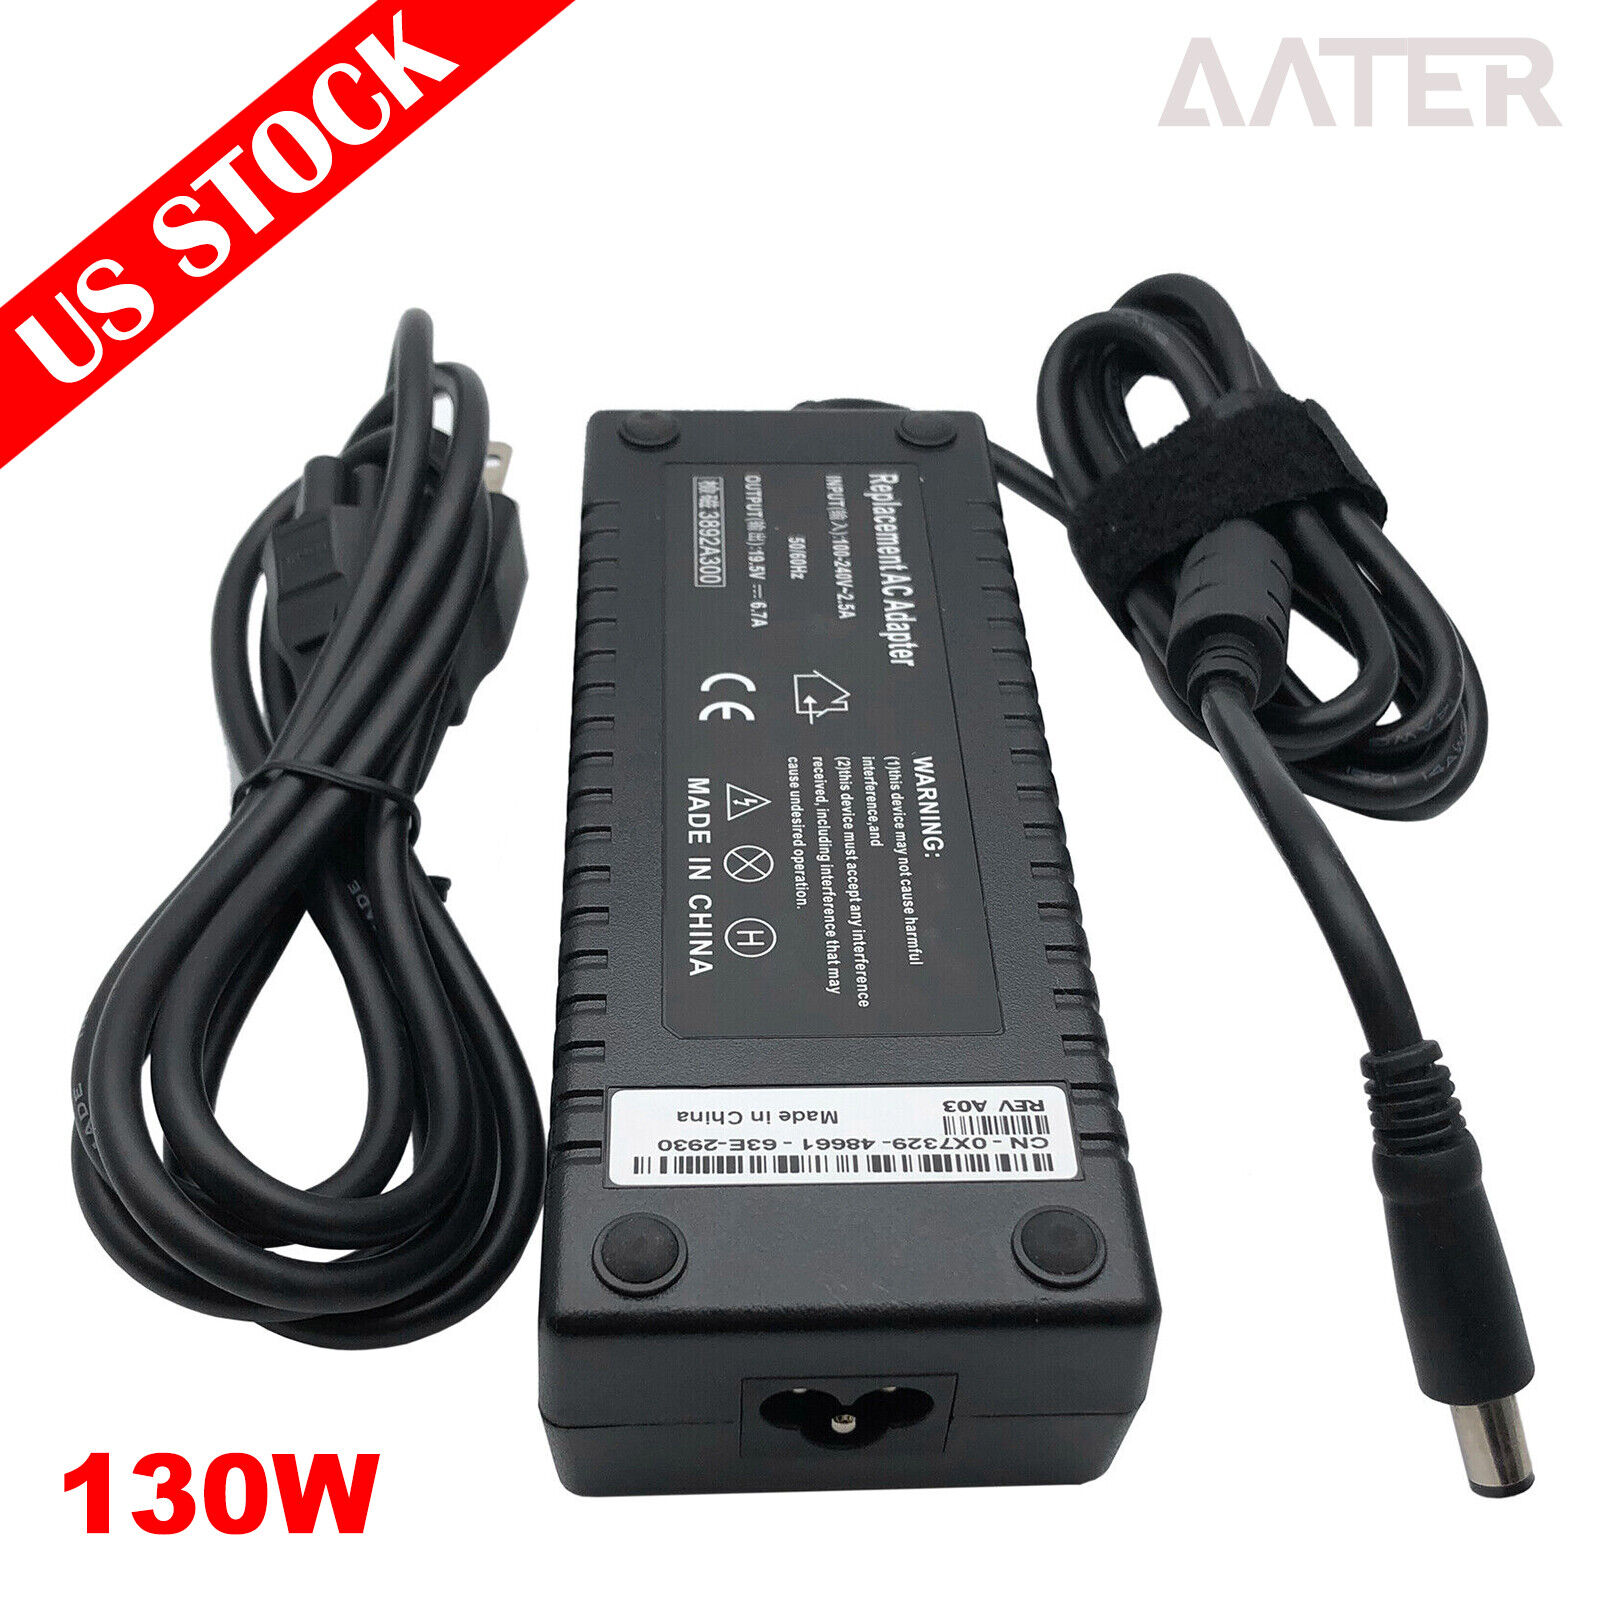 For Dell Inspiron 5150 5160 9300 Laptop AC Adapter Charger & Power Cord 130W